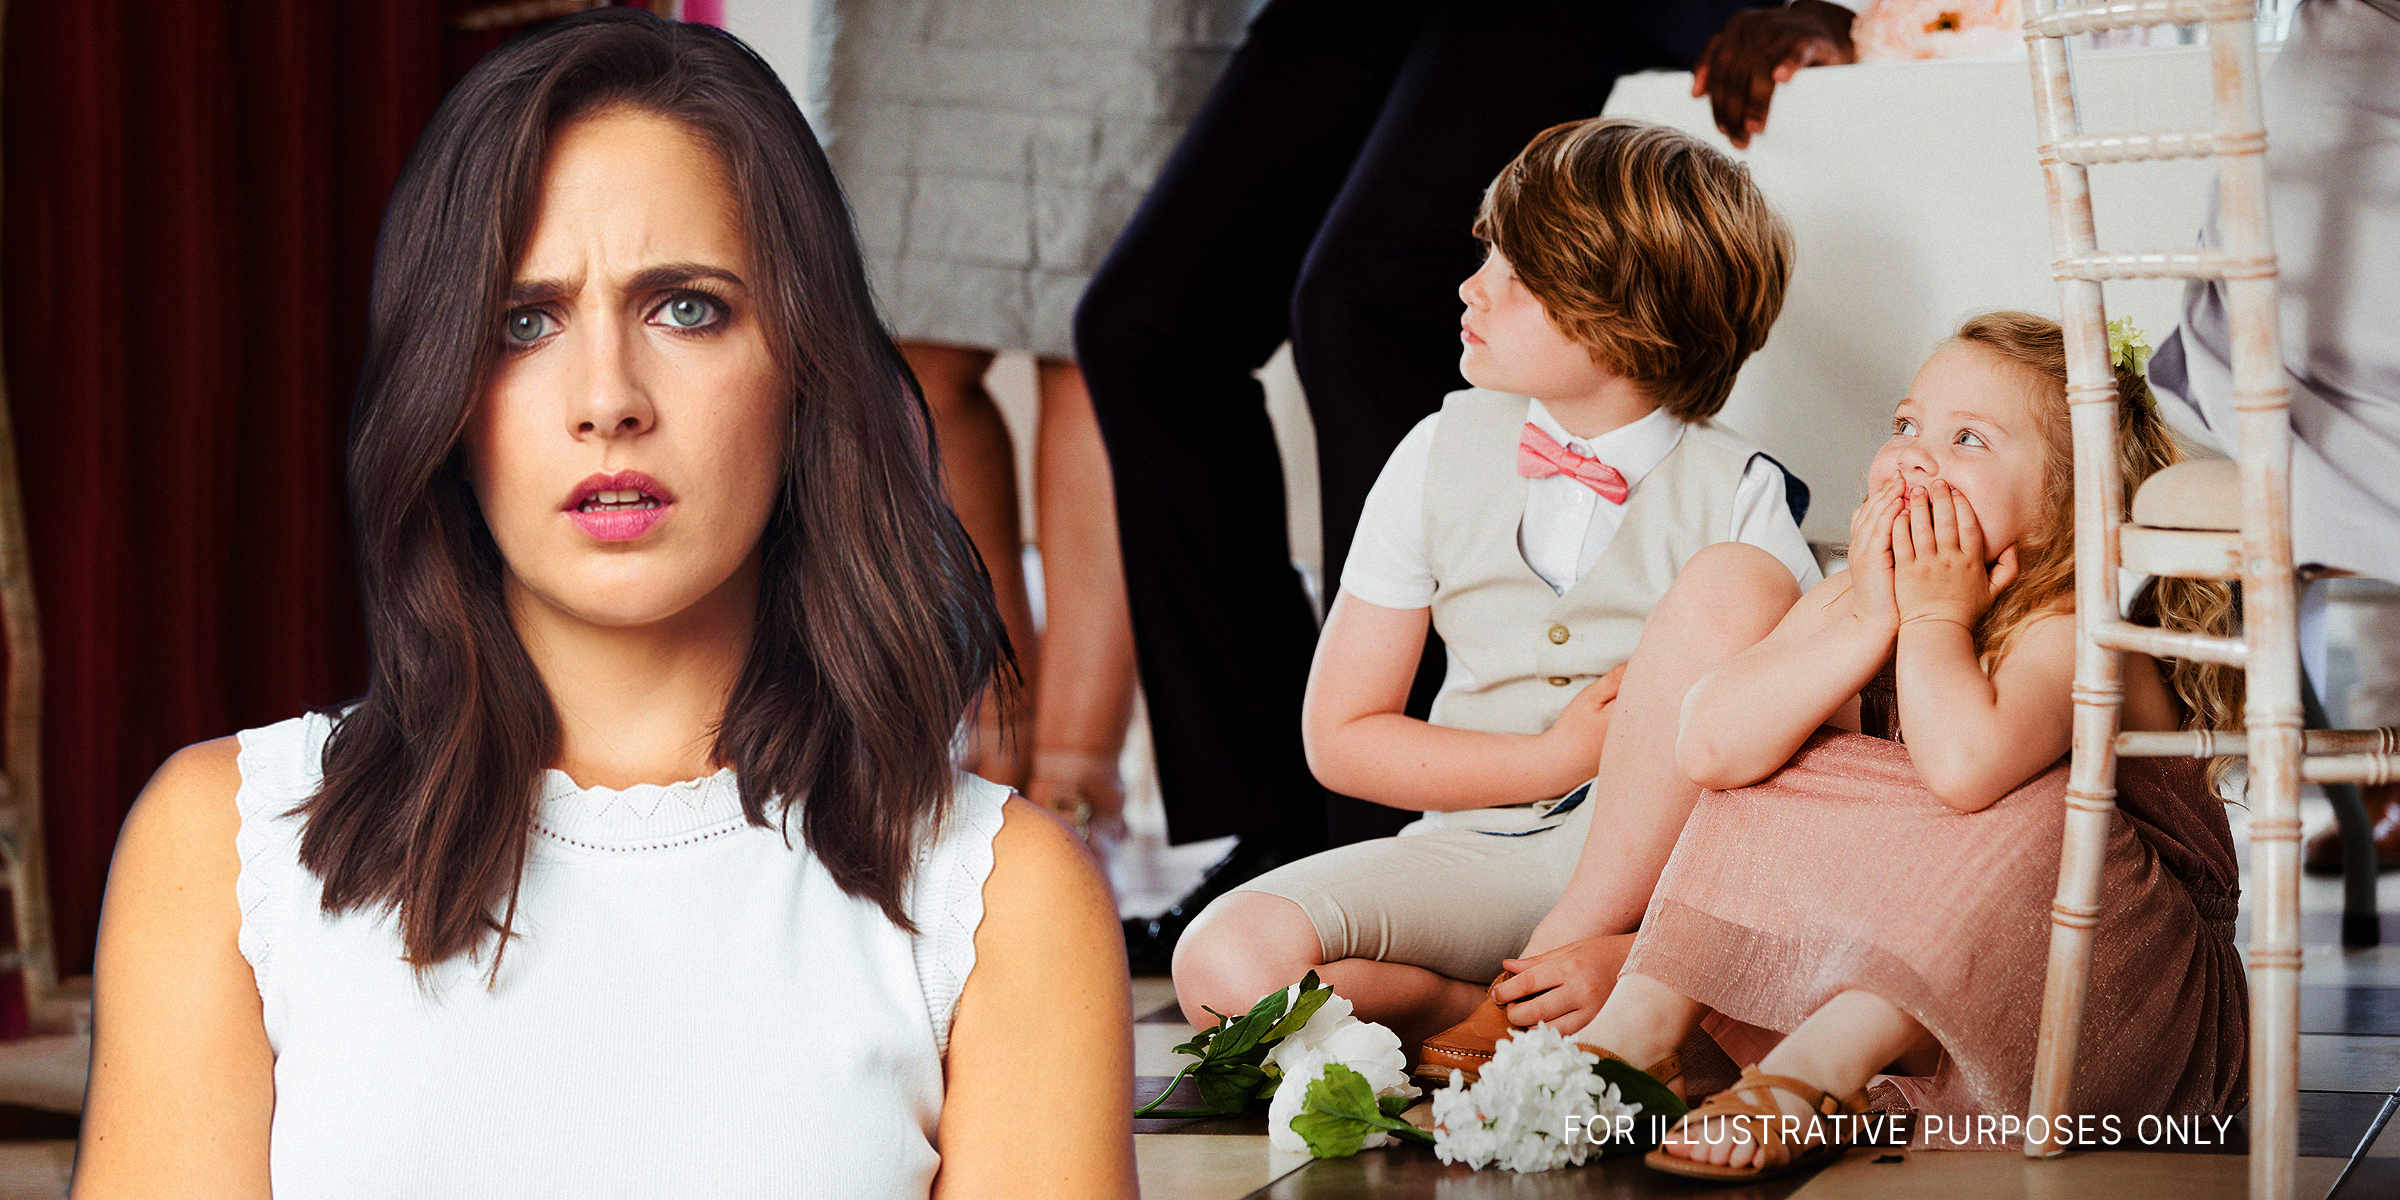 A shocked woman in the foreground with children sitting in the back at an event | Source: Shutterstock